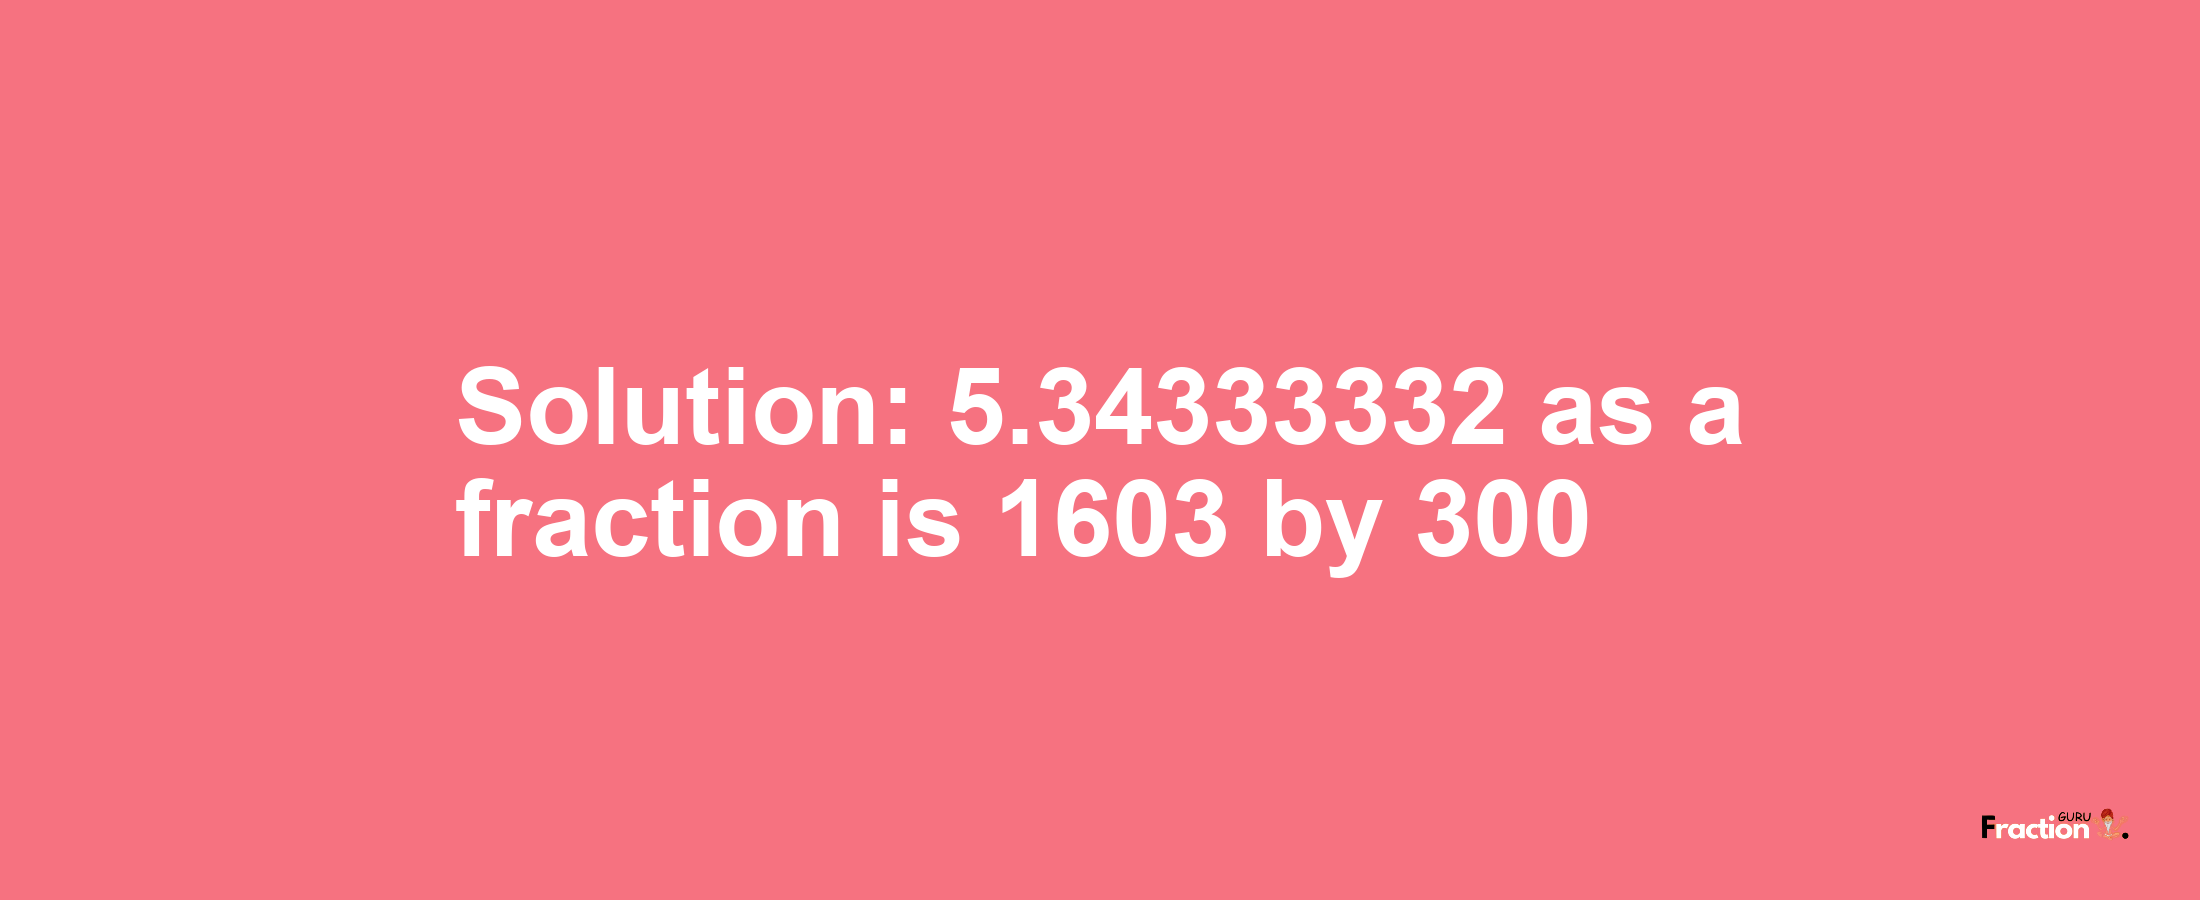 Solution:5.34333332 as a fraction is 1603/300